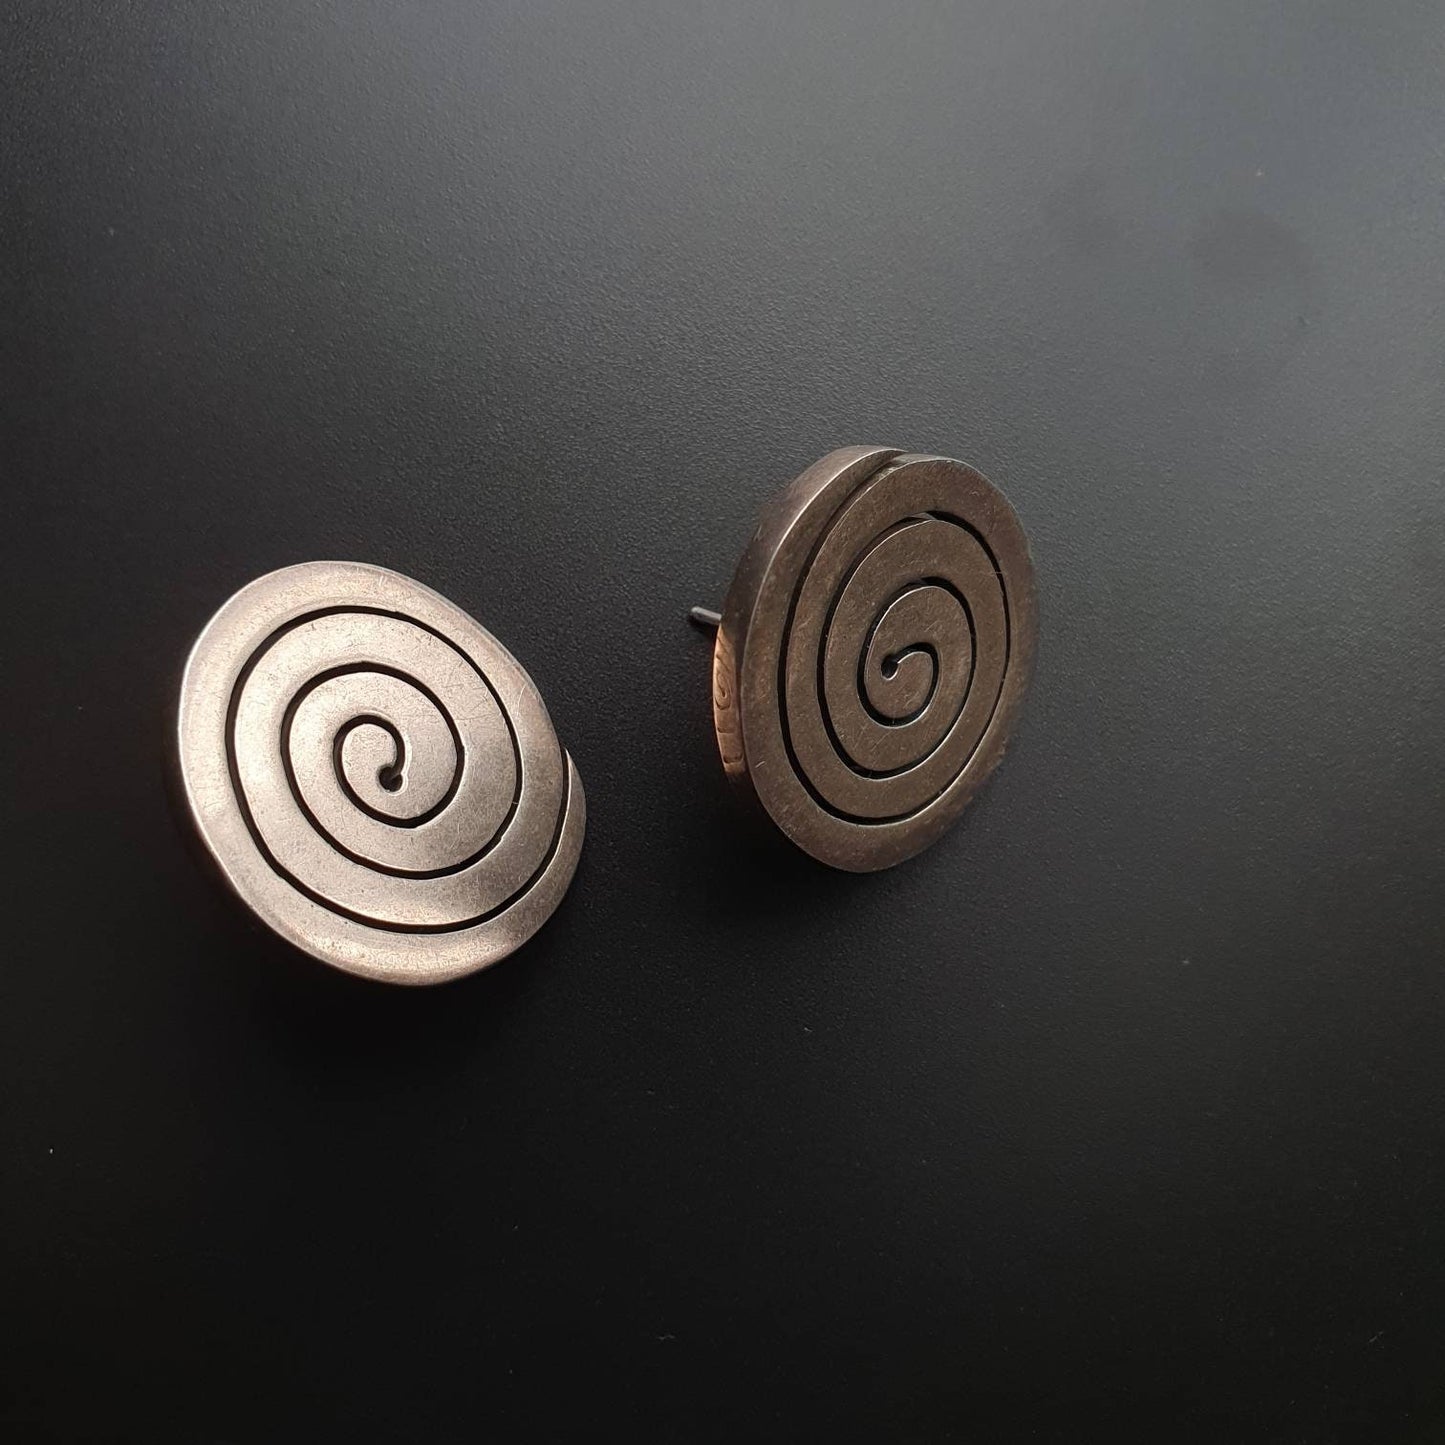 Silver Earrings, Sterling Silver Statement Earrings, Spiral Earrings, Studs Statement, Modernist Abstract Circle Round Jewellery, Street way